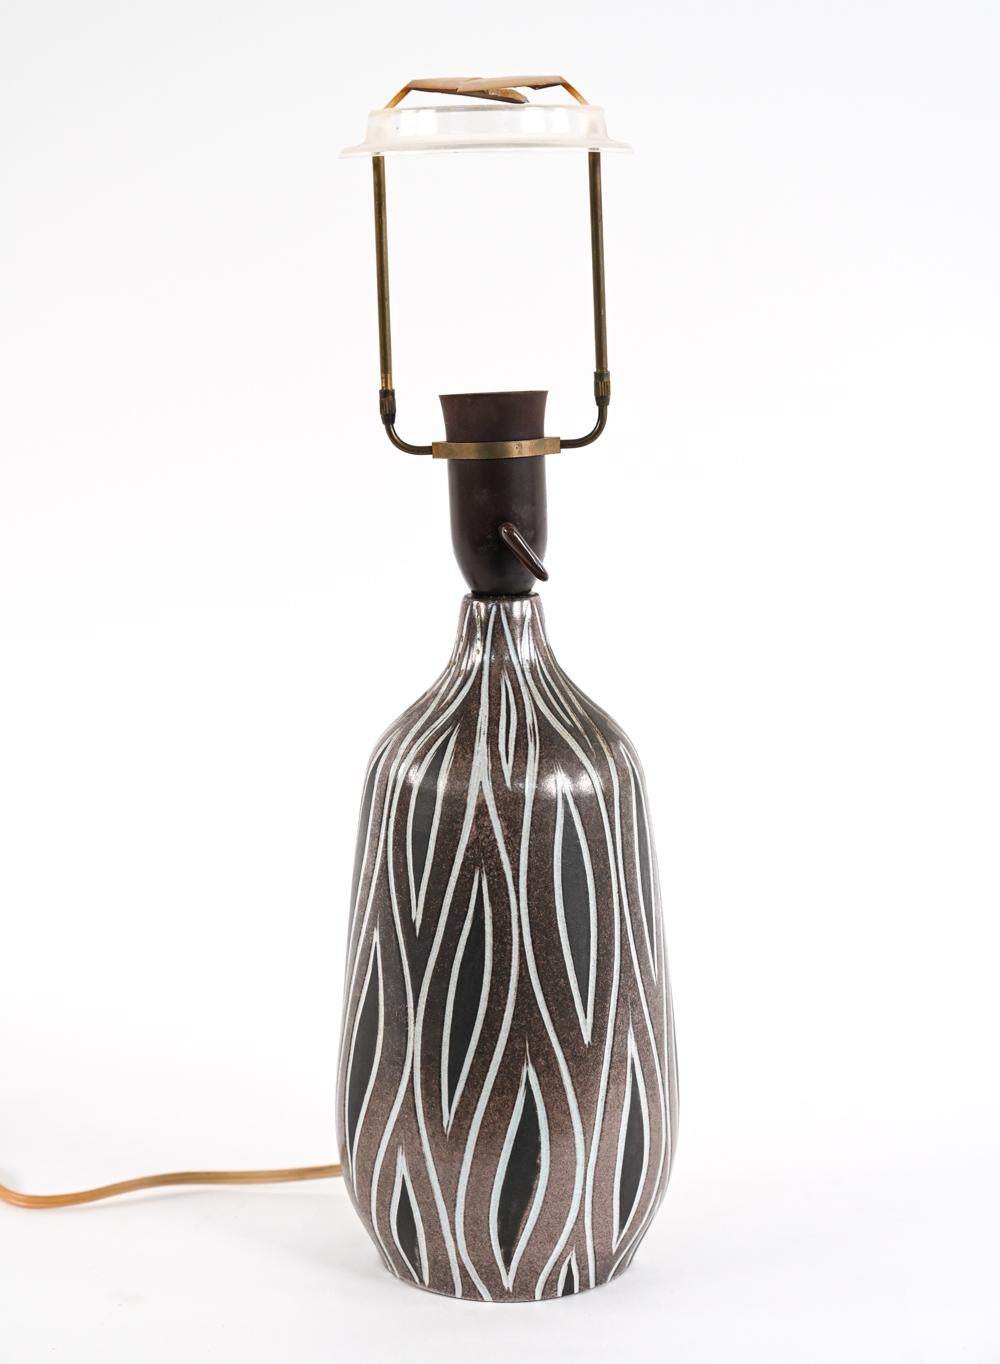 This unique and rare pottery lamp comes to you from the Rødovre studio of noted Danish ceramist H. Rudolf Petersen, whose work is often characterized by bold and graphic lines, mastery of the sgraffito technique, and African-inspired earth tones.